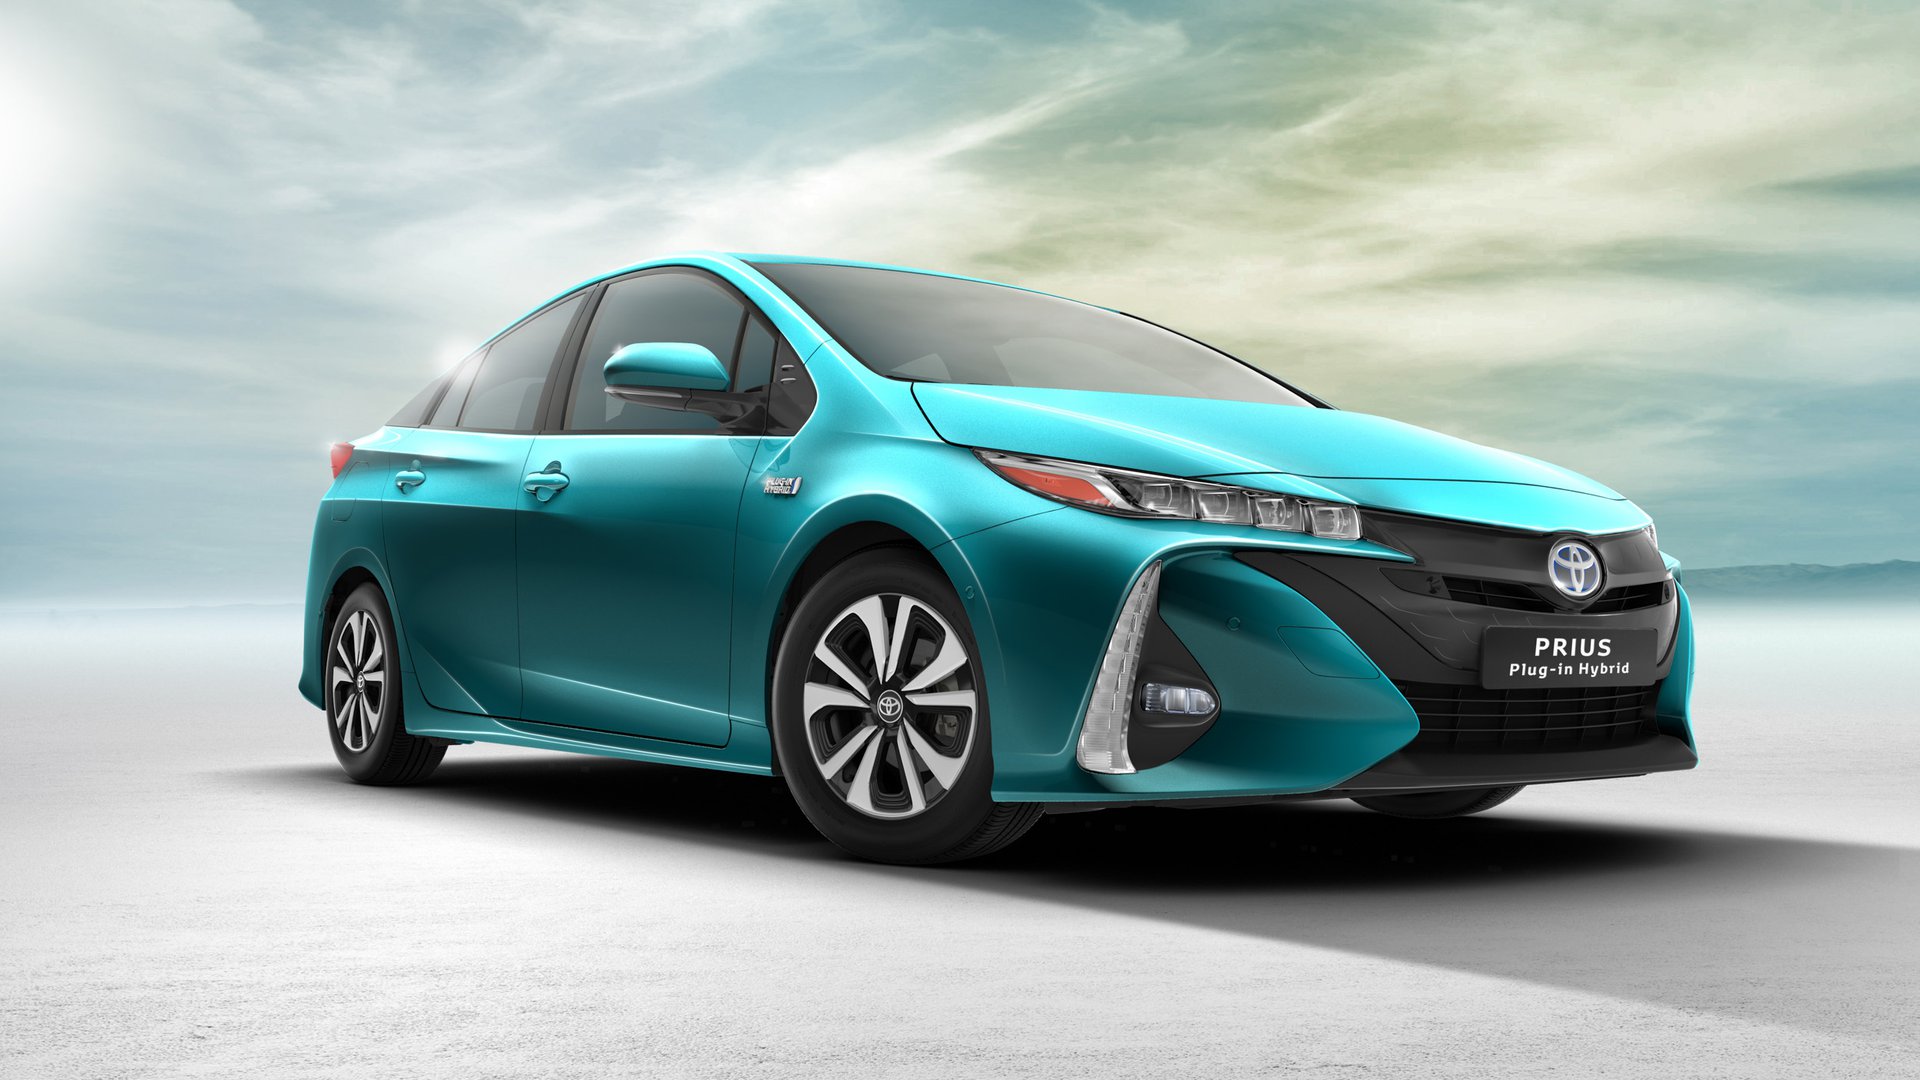 world-premiere-of-toyota-s-second-generation-prius-plug-in-hybrid